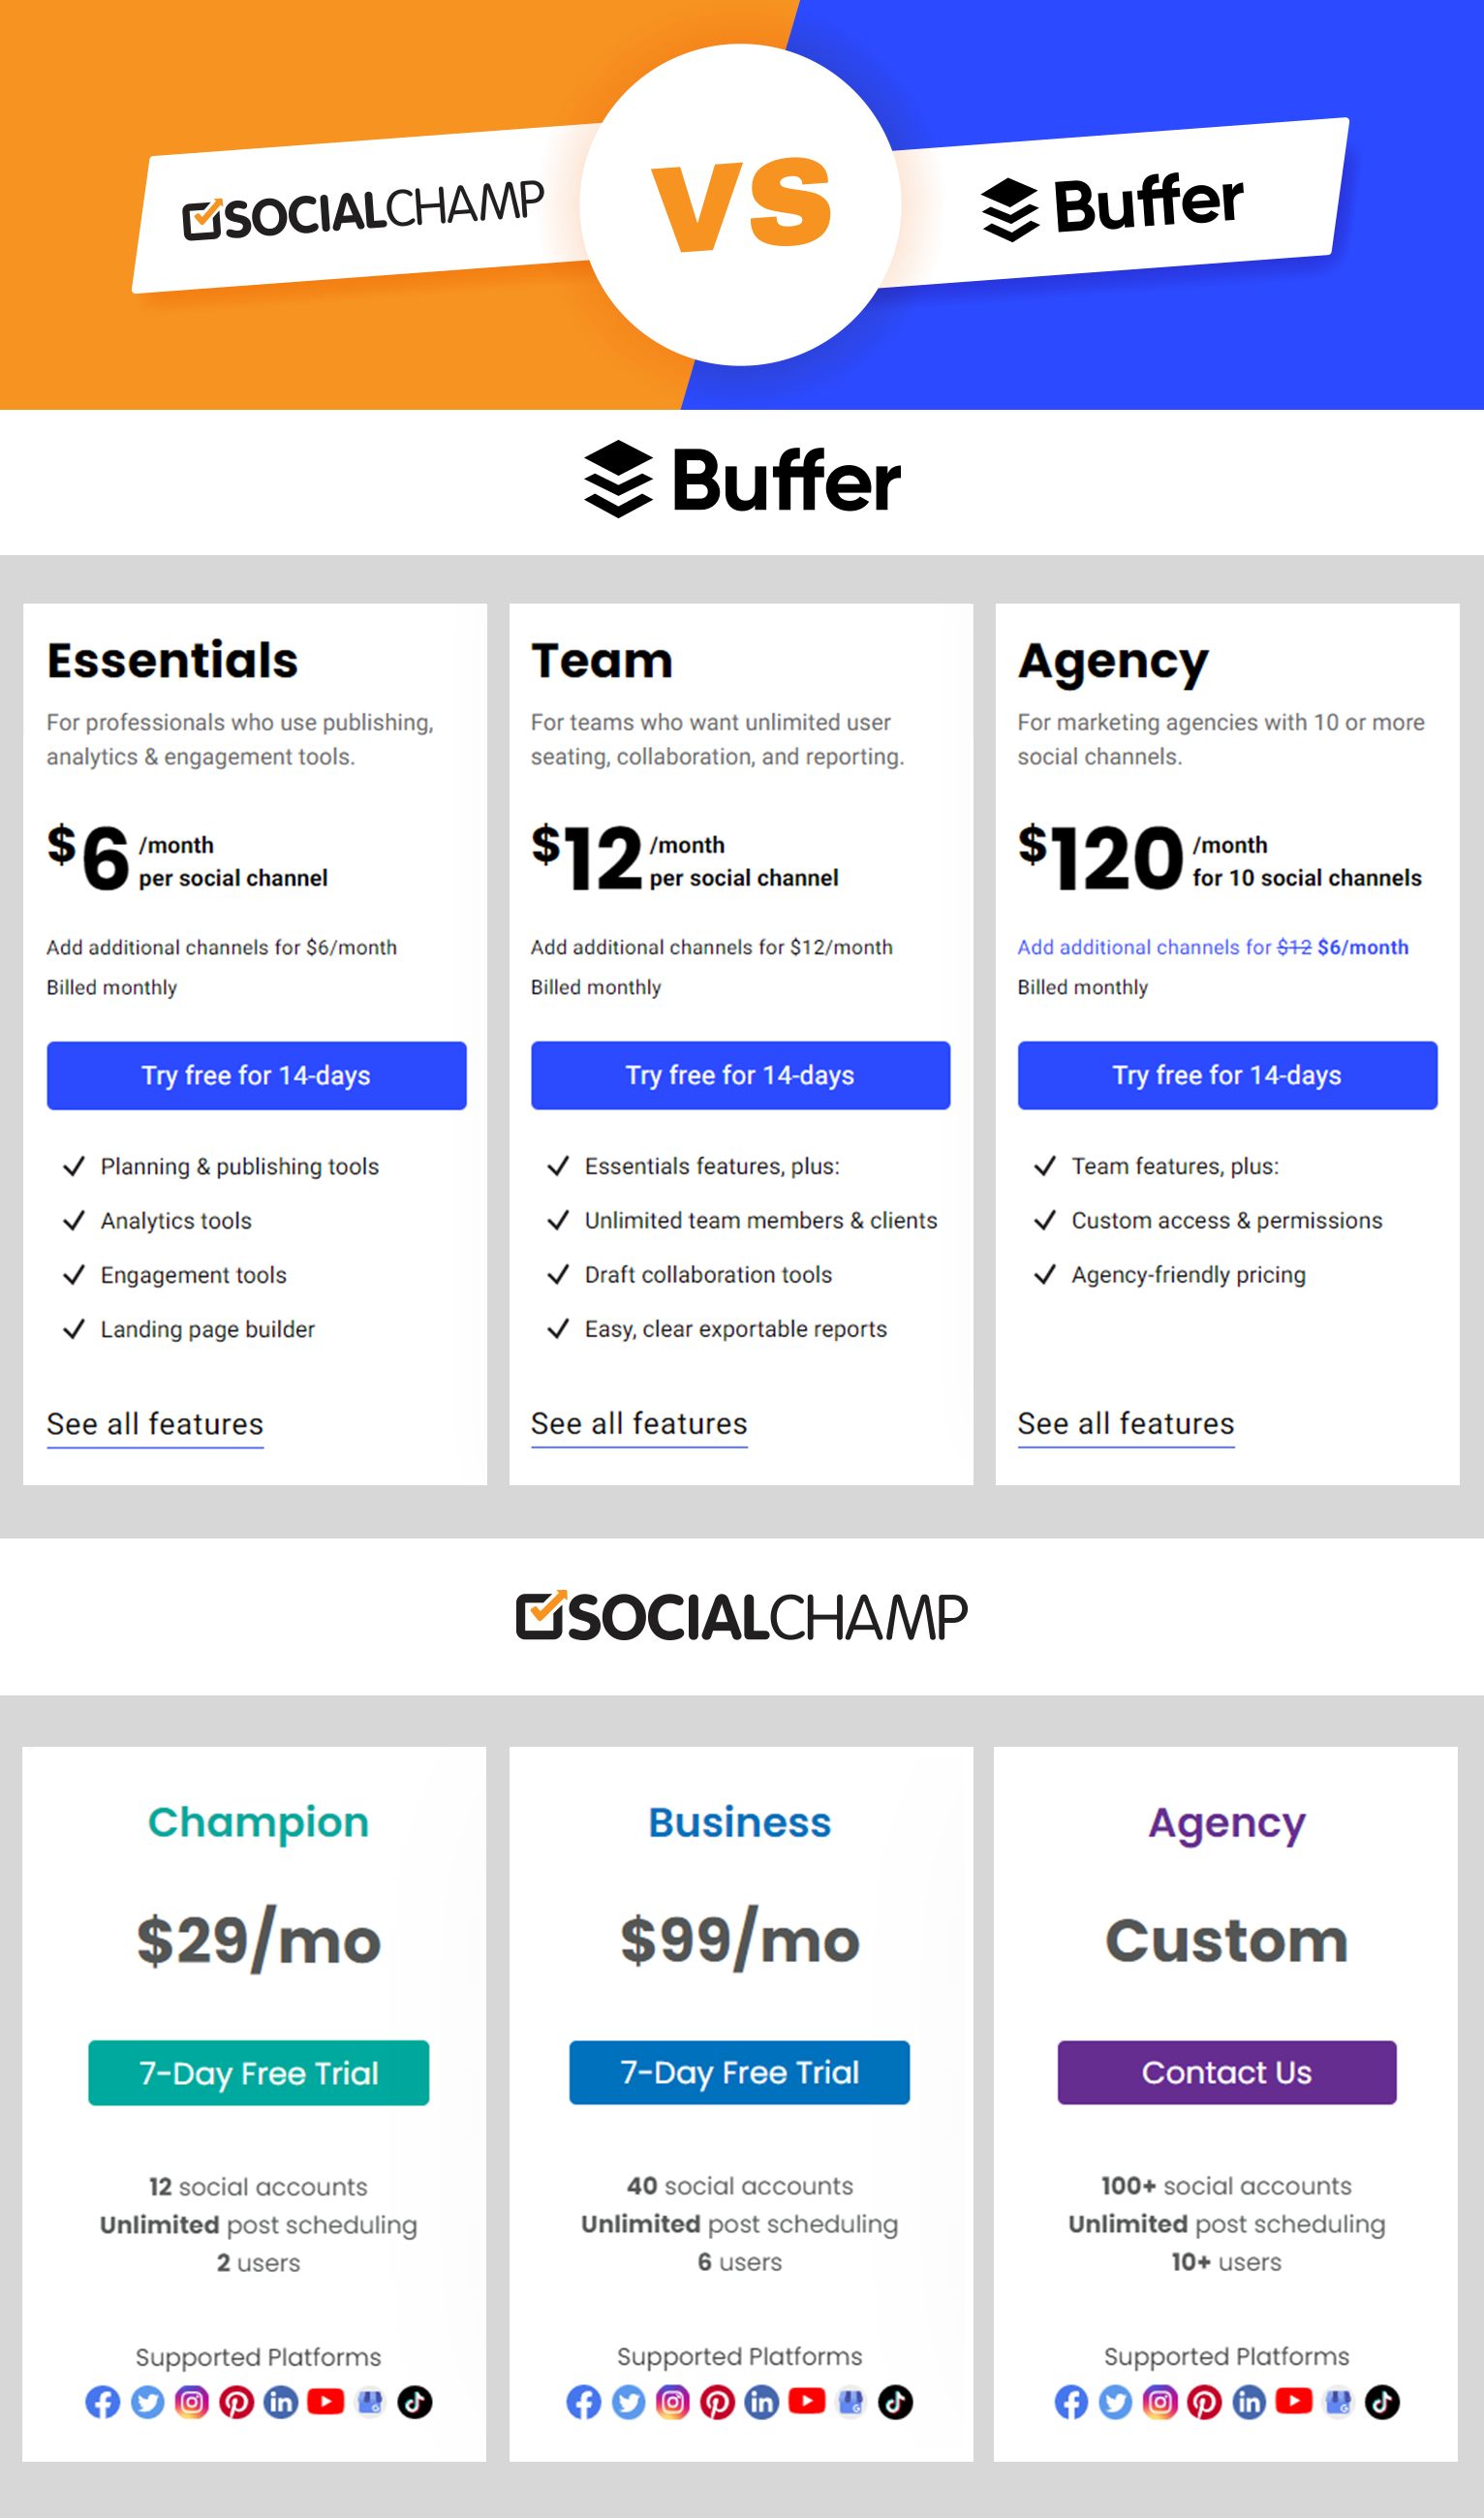 https://www.socialchamp.io/wp-content/uploads/2022/06/Buffer-Pricing-Comparison-V1-01.png